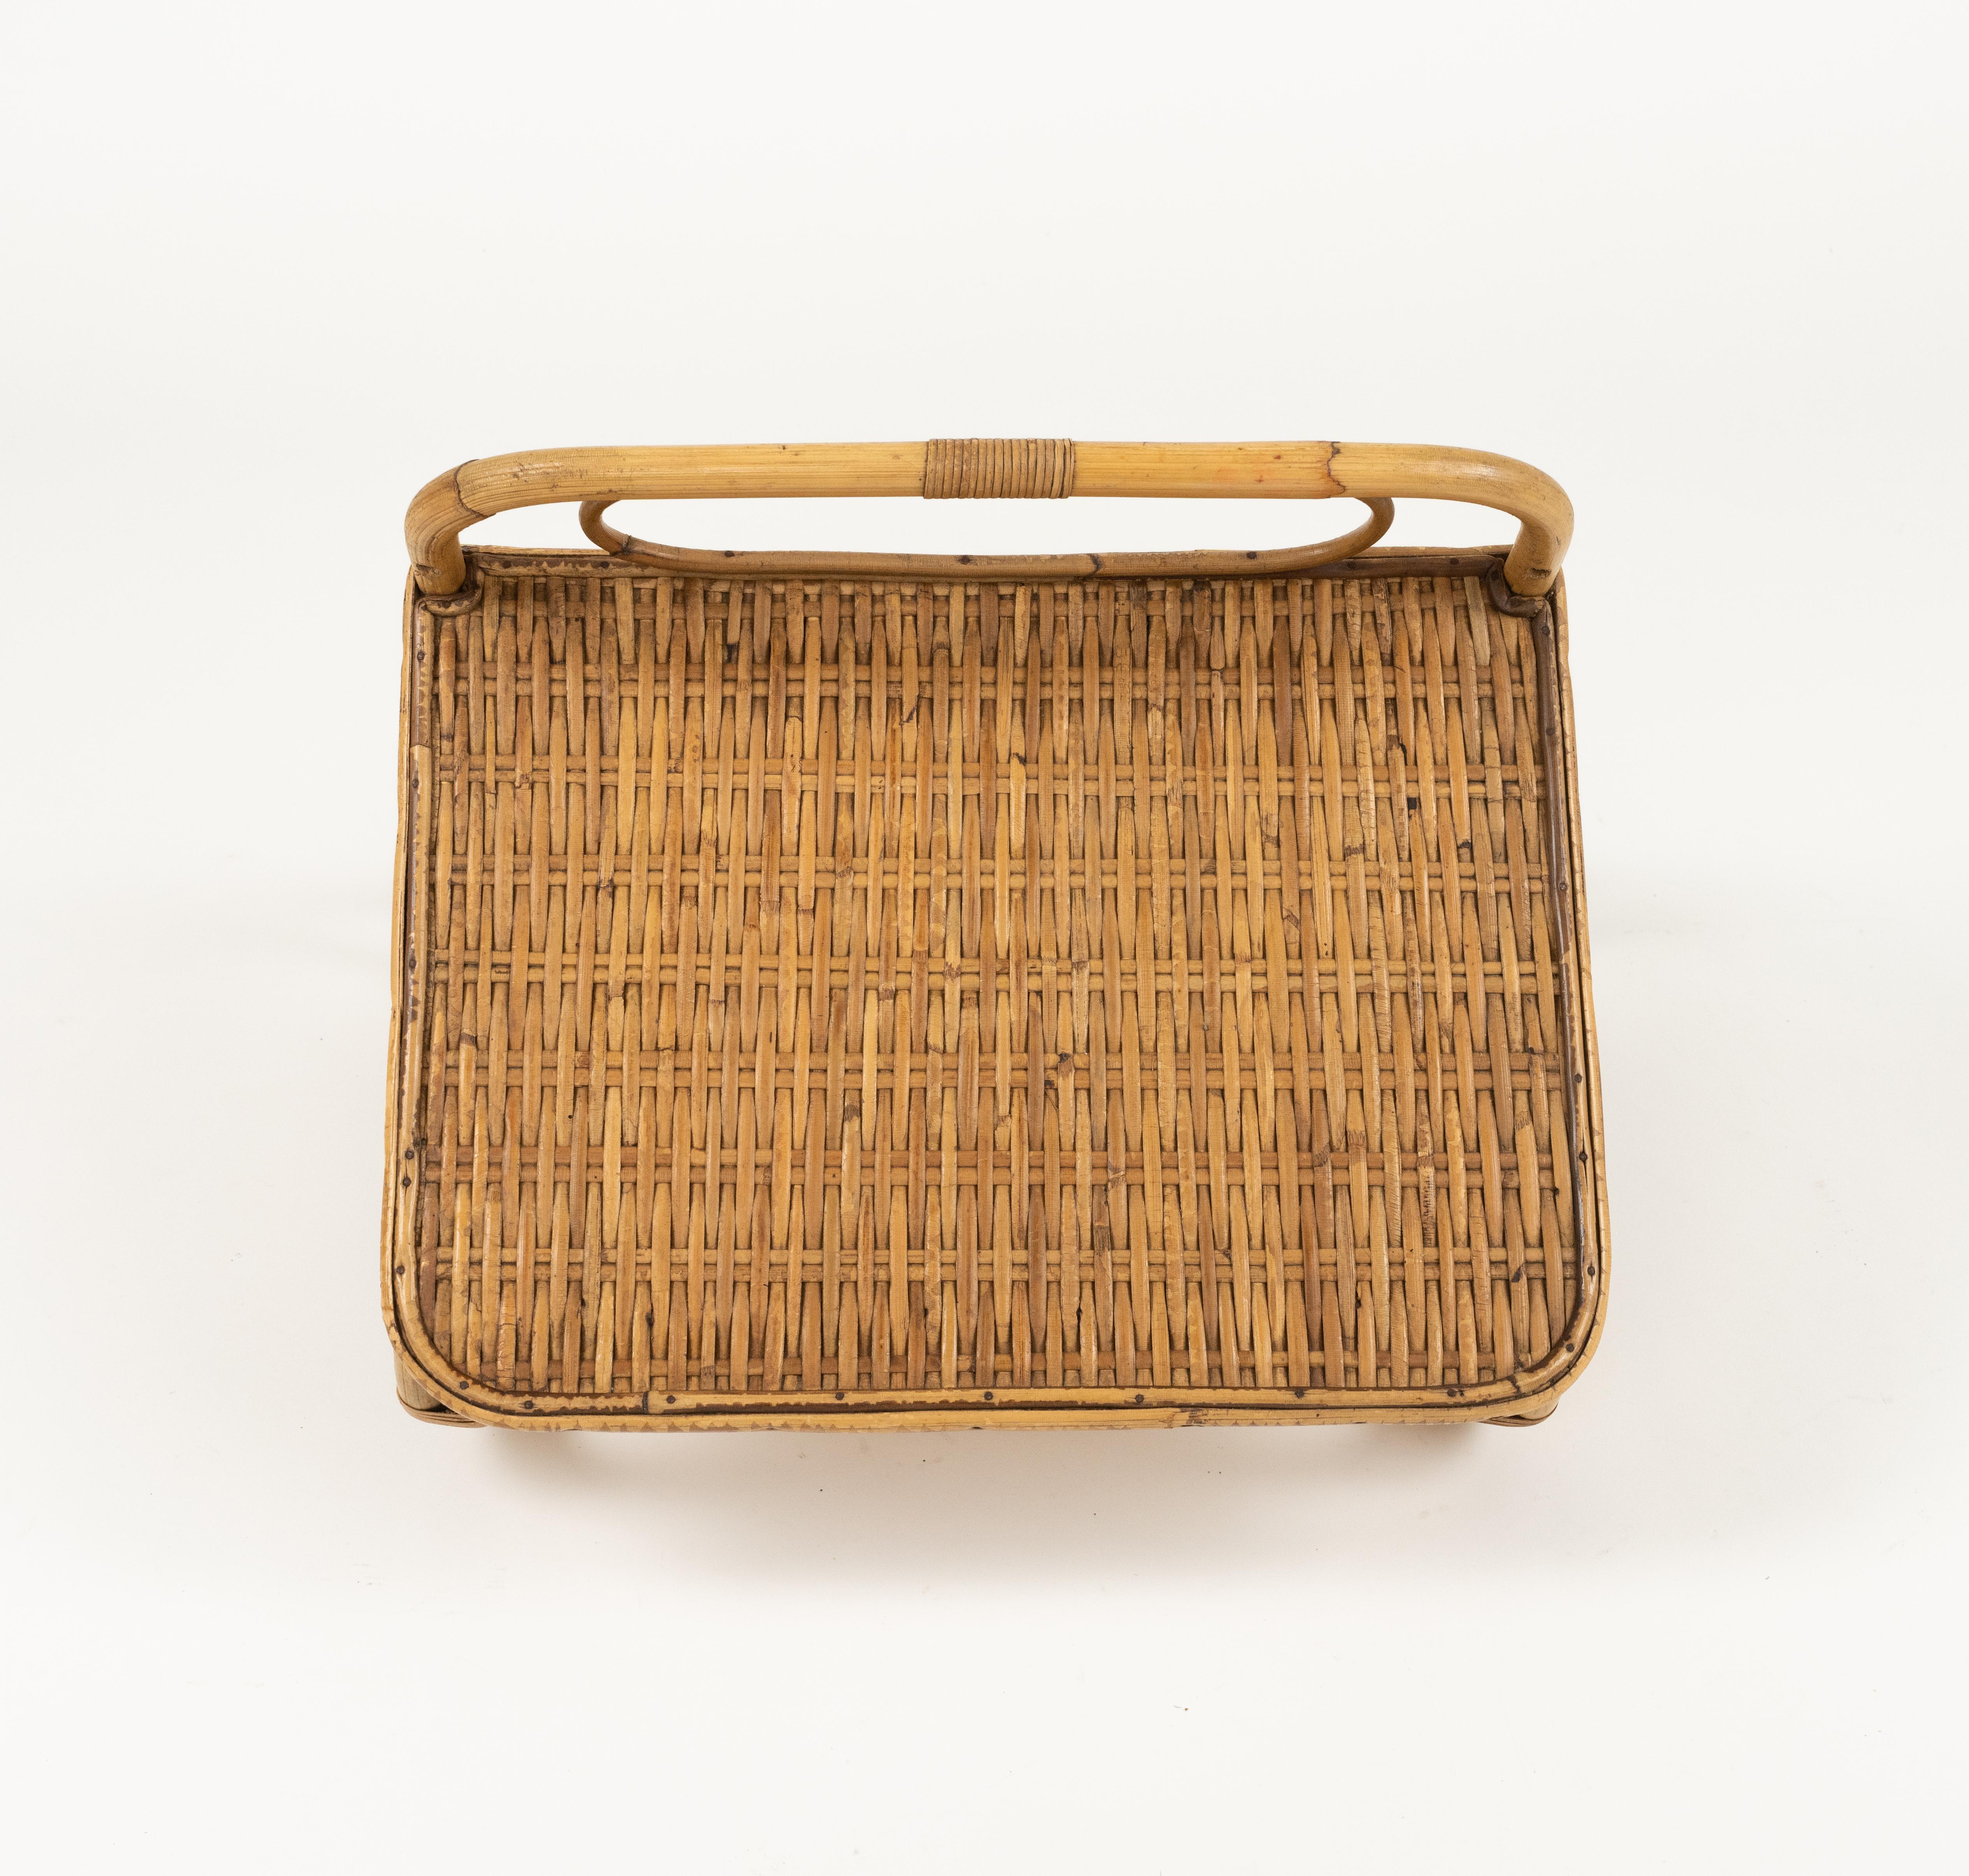 Midcentury Rattan & Wicker Pair of Wall Shelf or Hanging Side Table, Italy 1960s For Sale 8